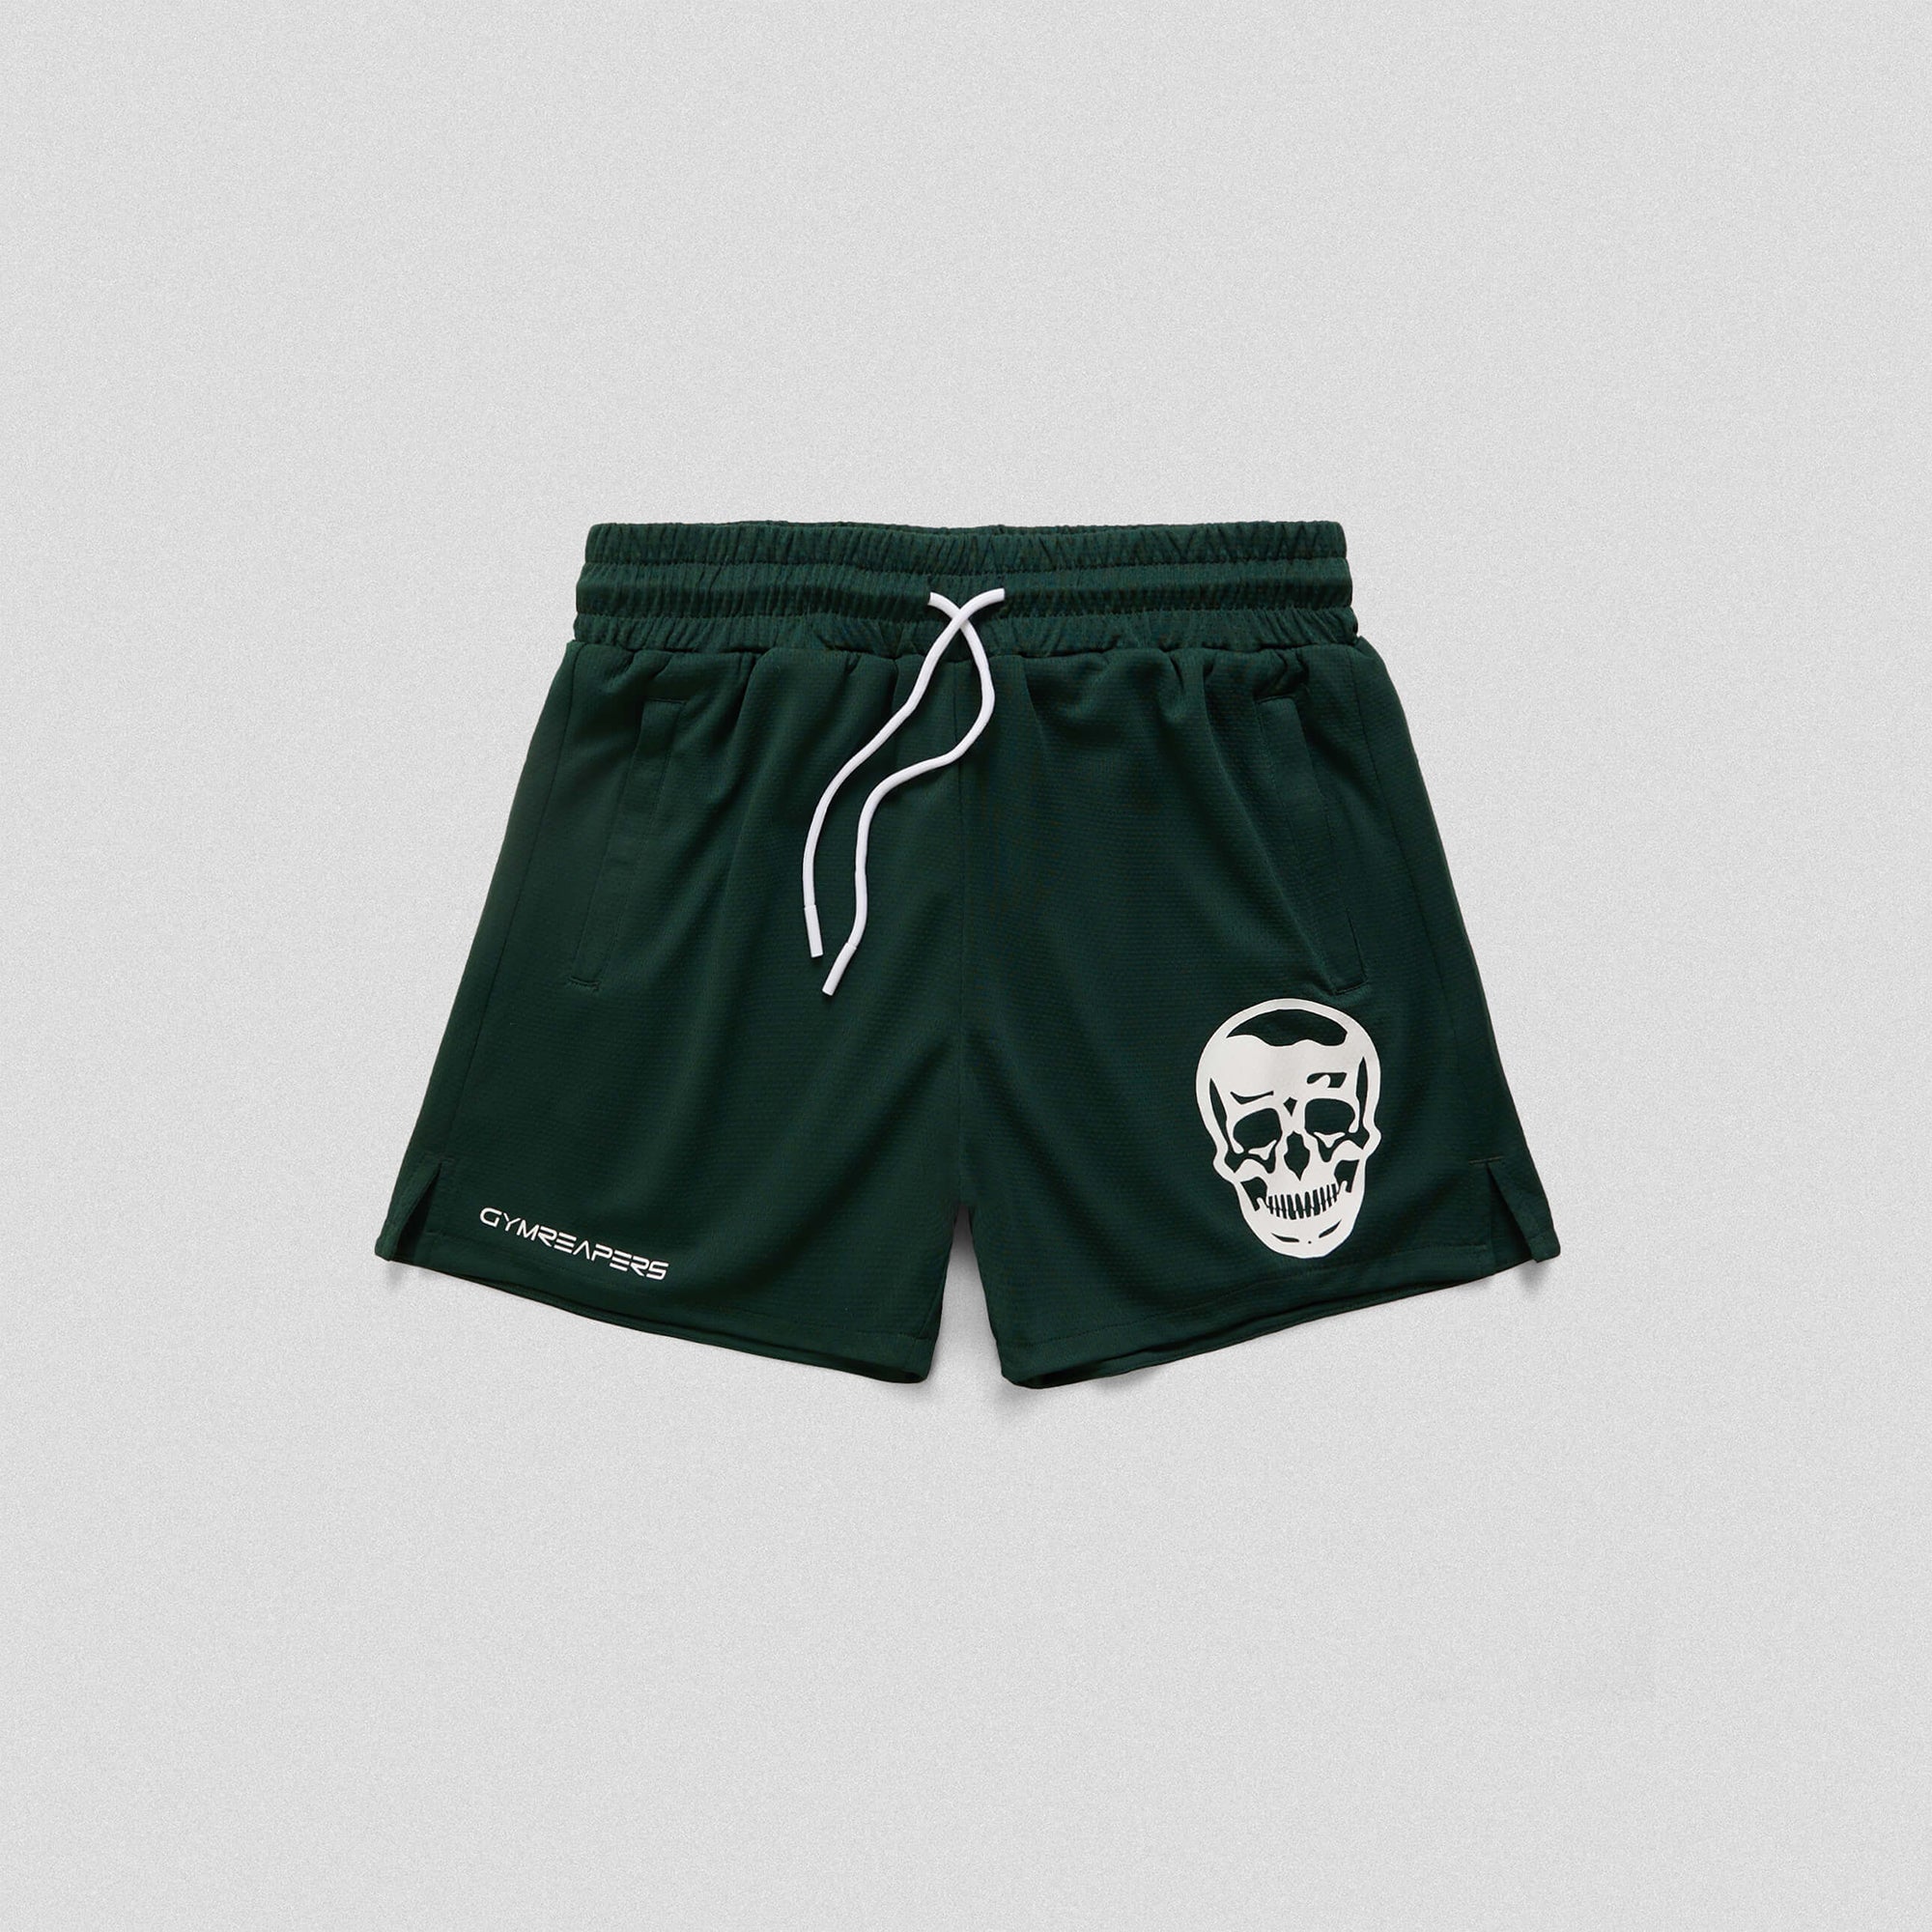 GYMREAPERS - Escape This Place // Escape Shorts #gymreapers